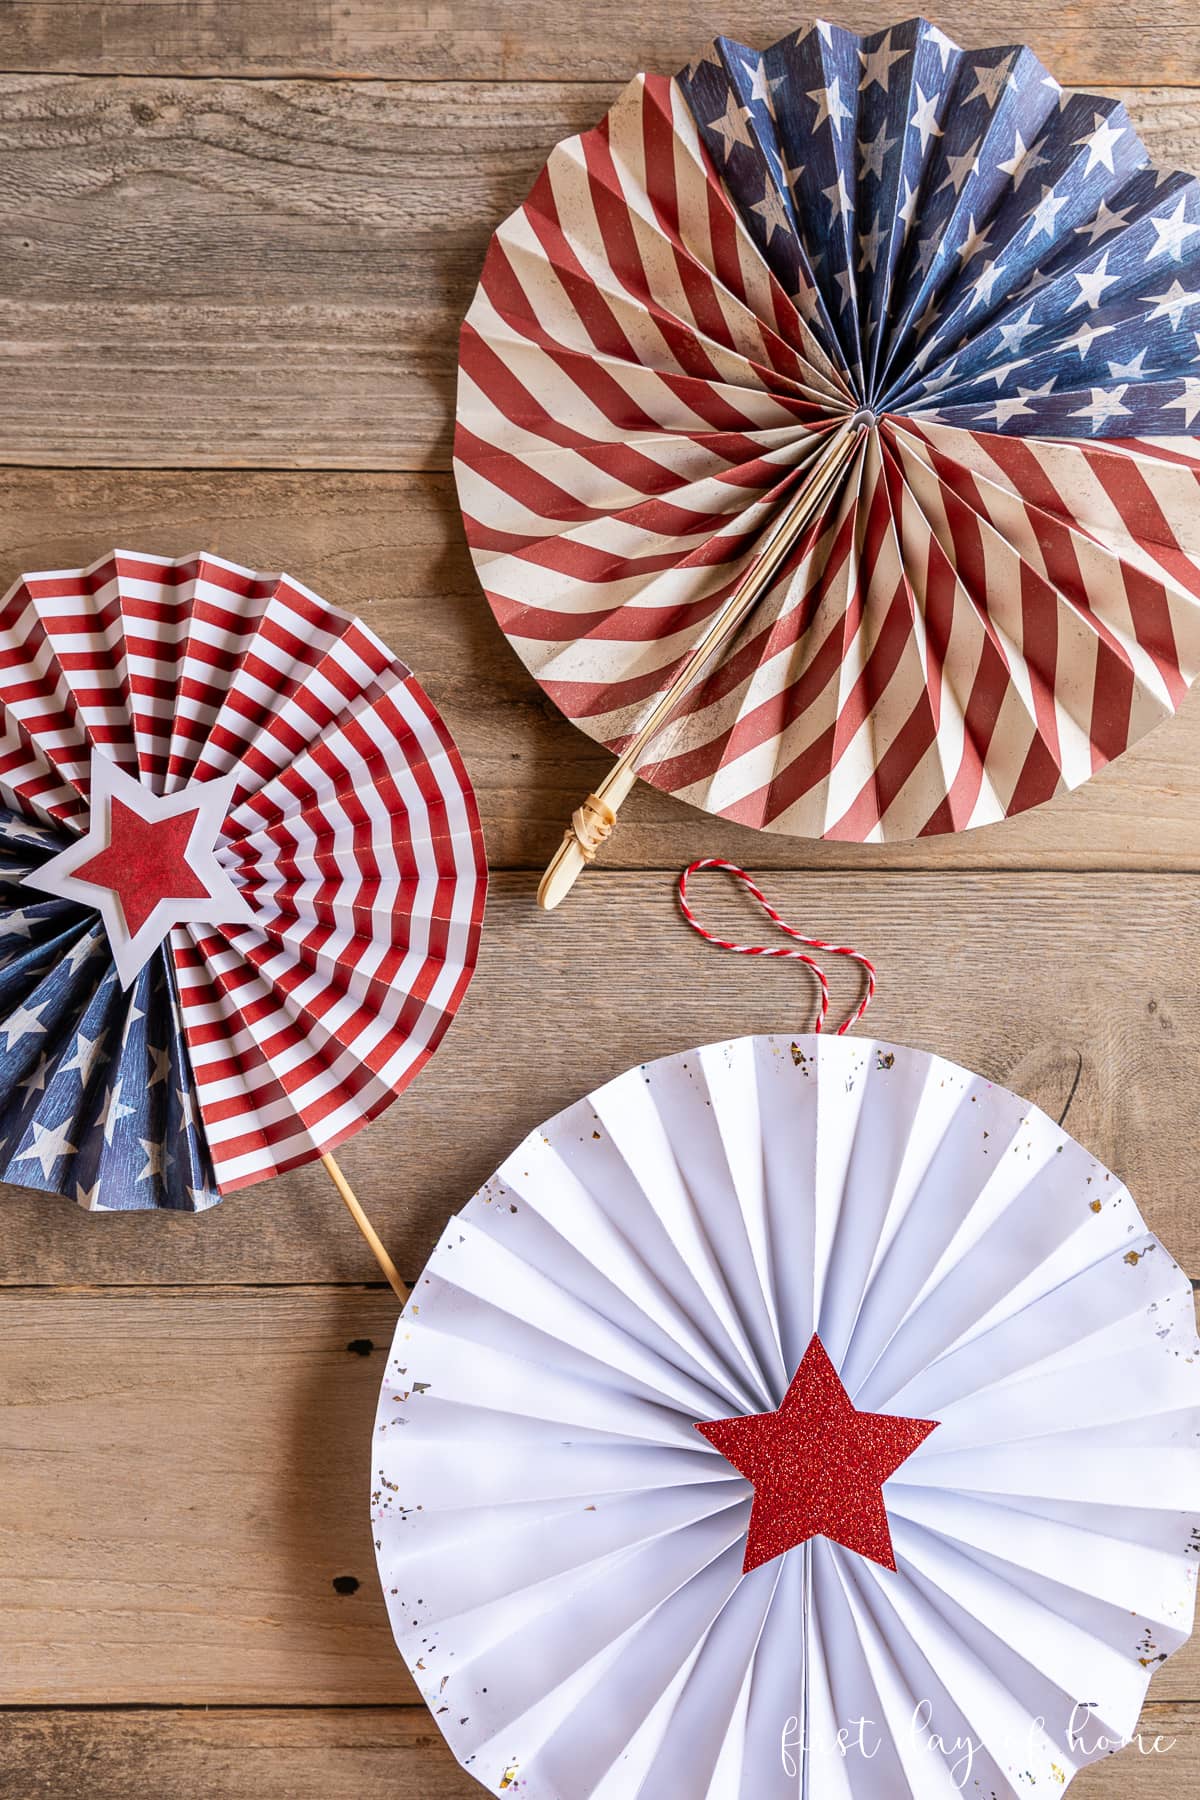 Paper fans with wooden skewer, popsicle sticks, and string for hanging